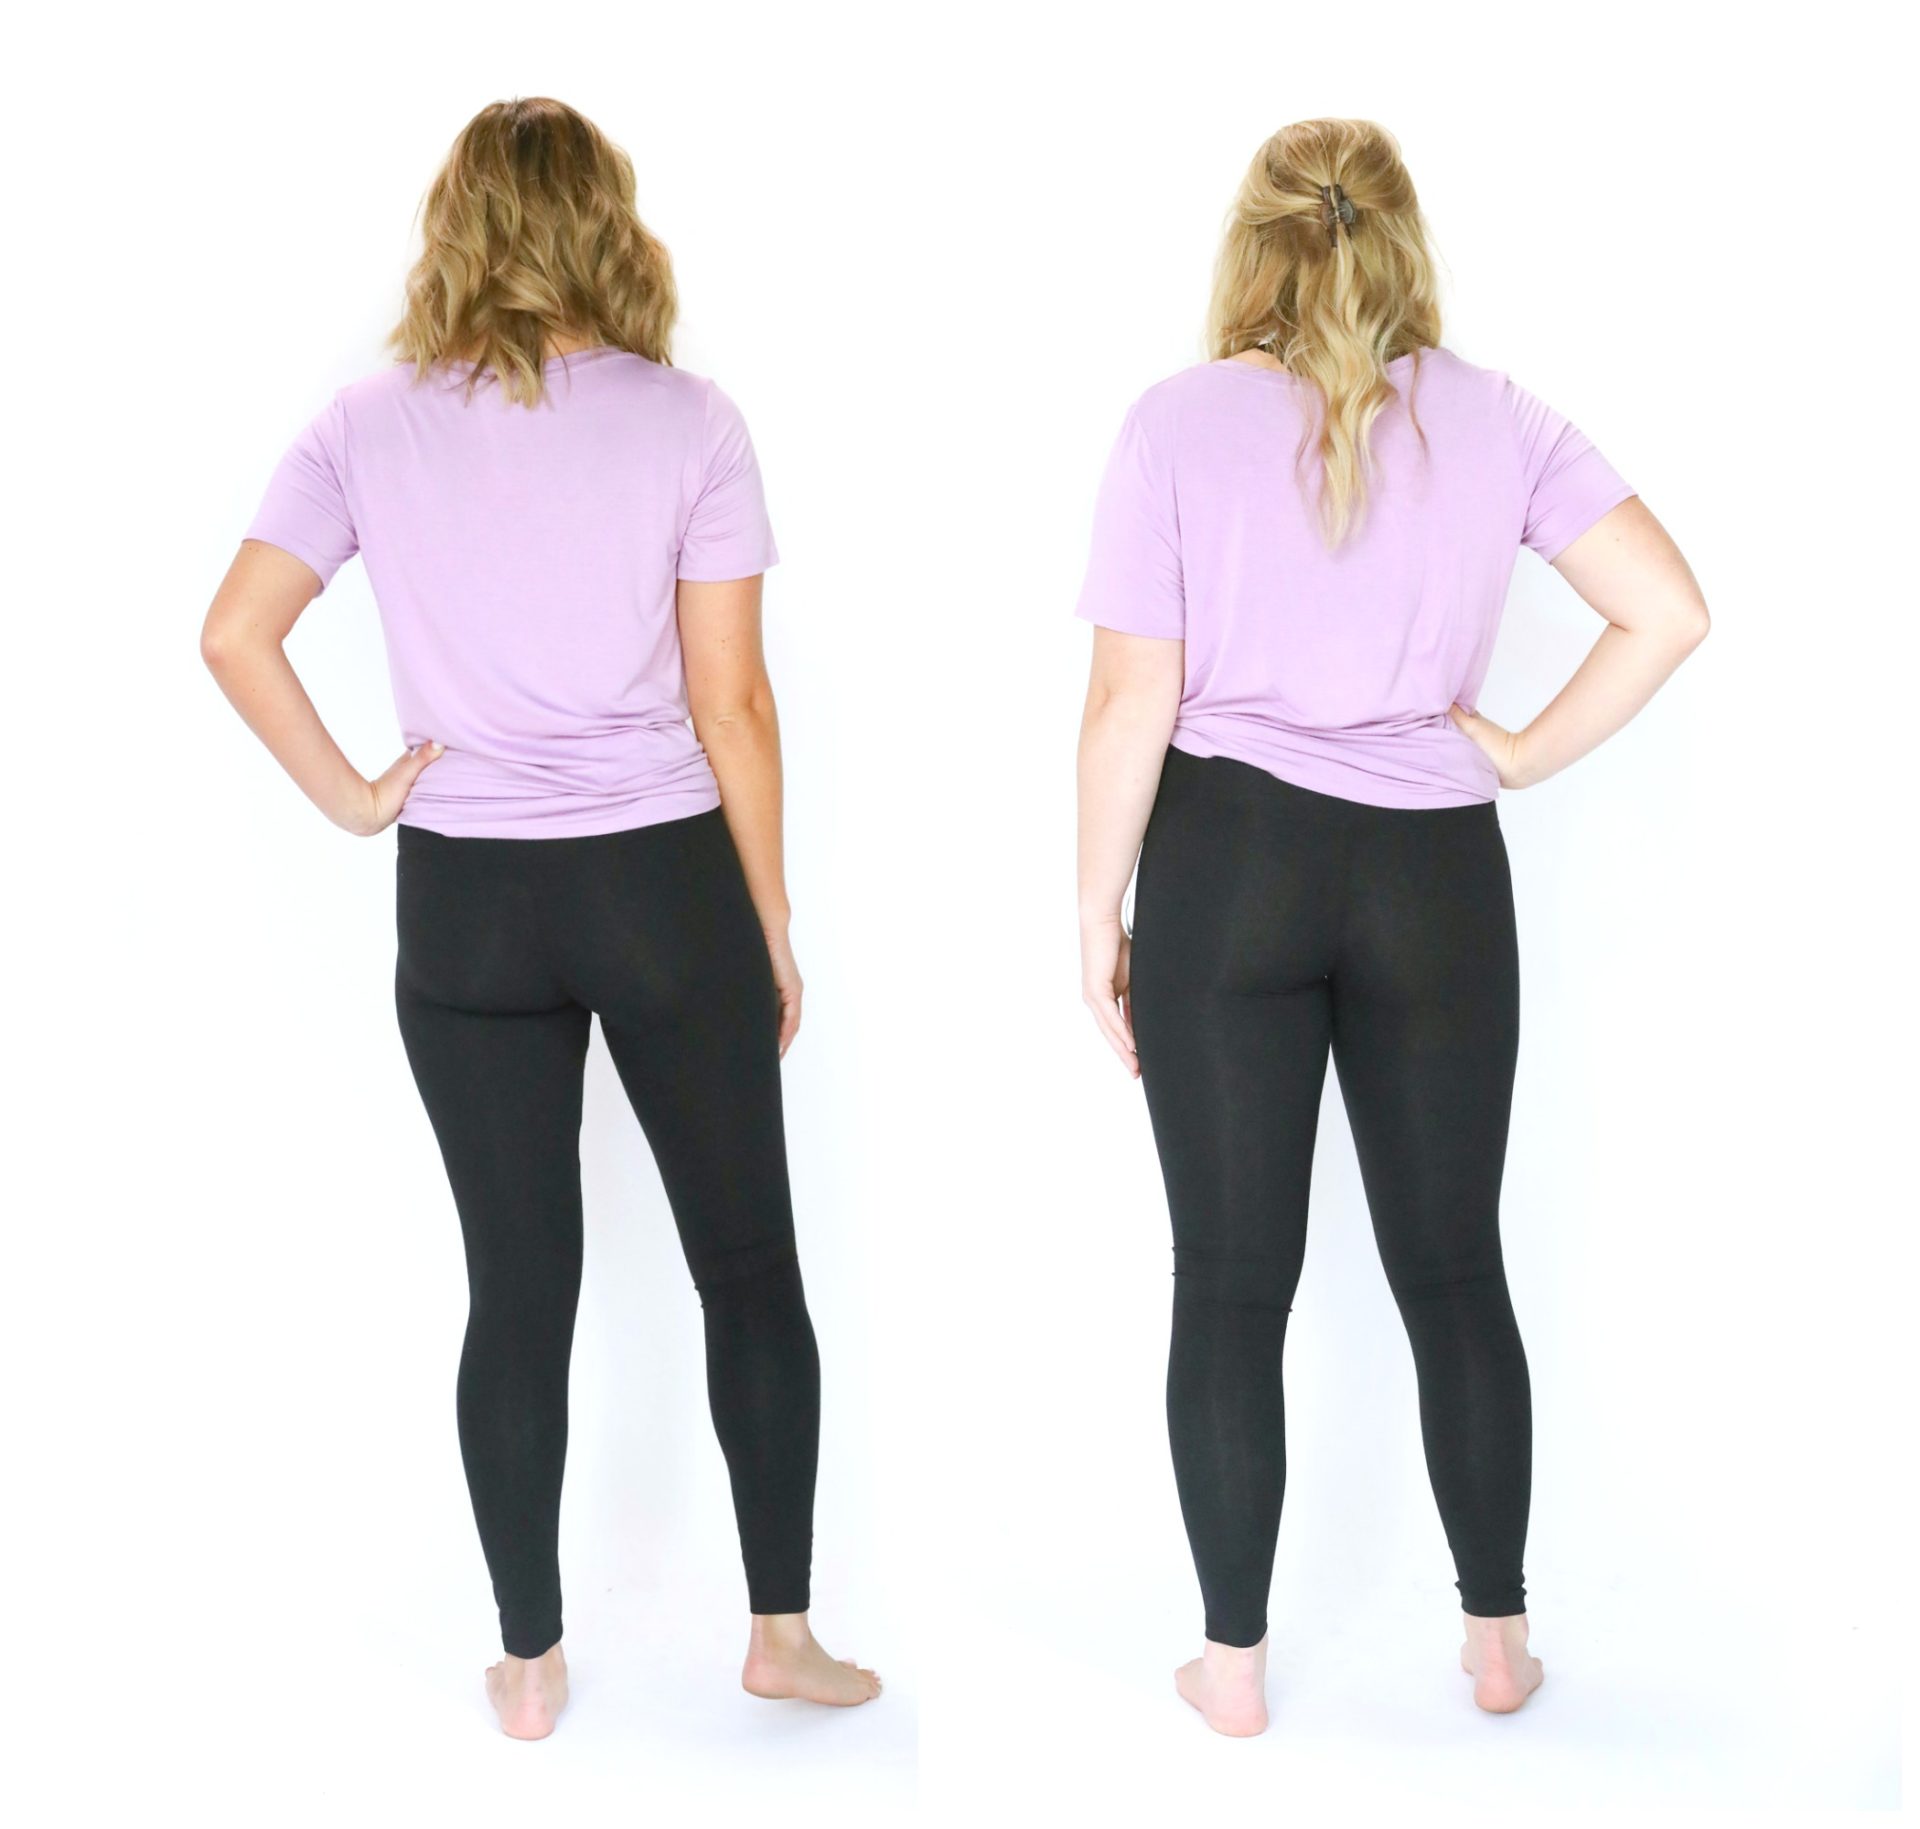 What is the difference between yoga pants and compression tights